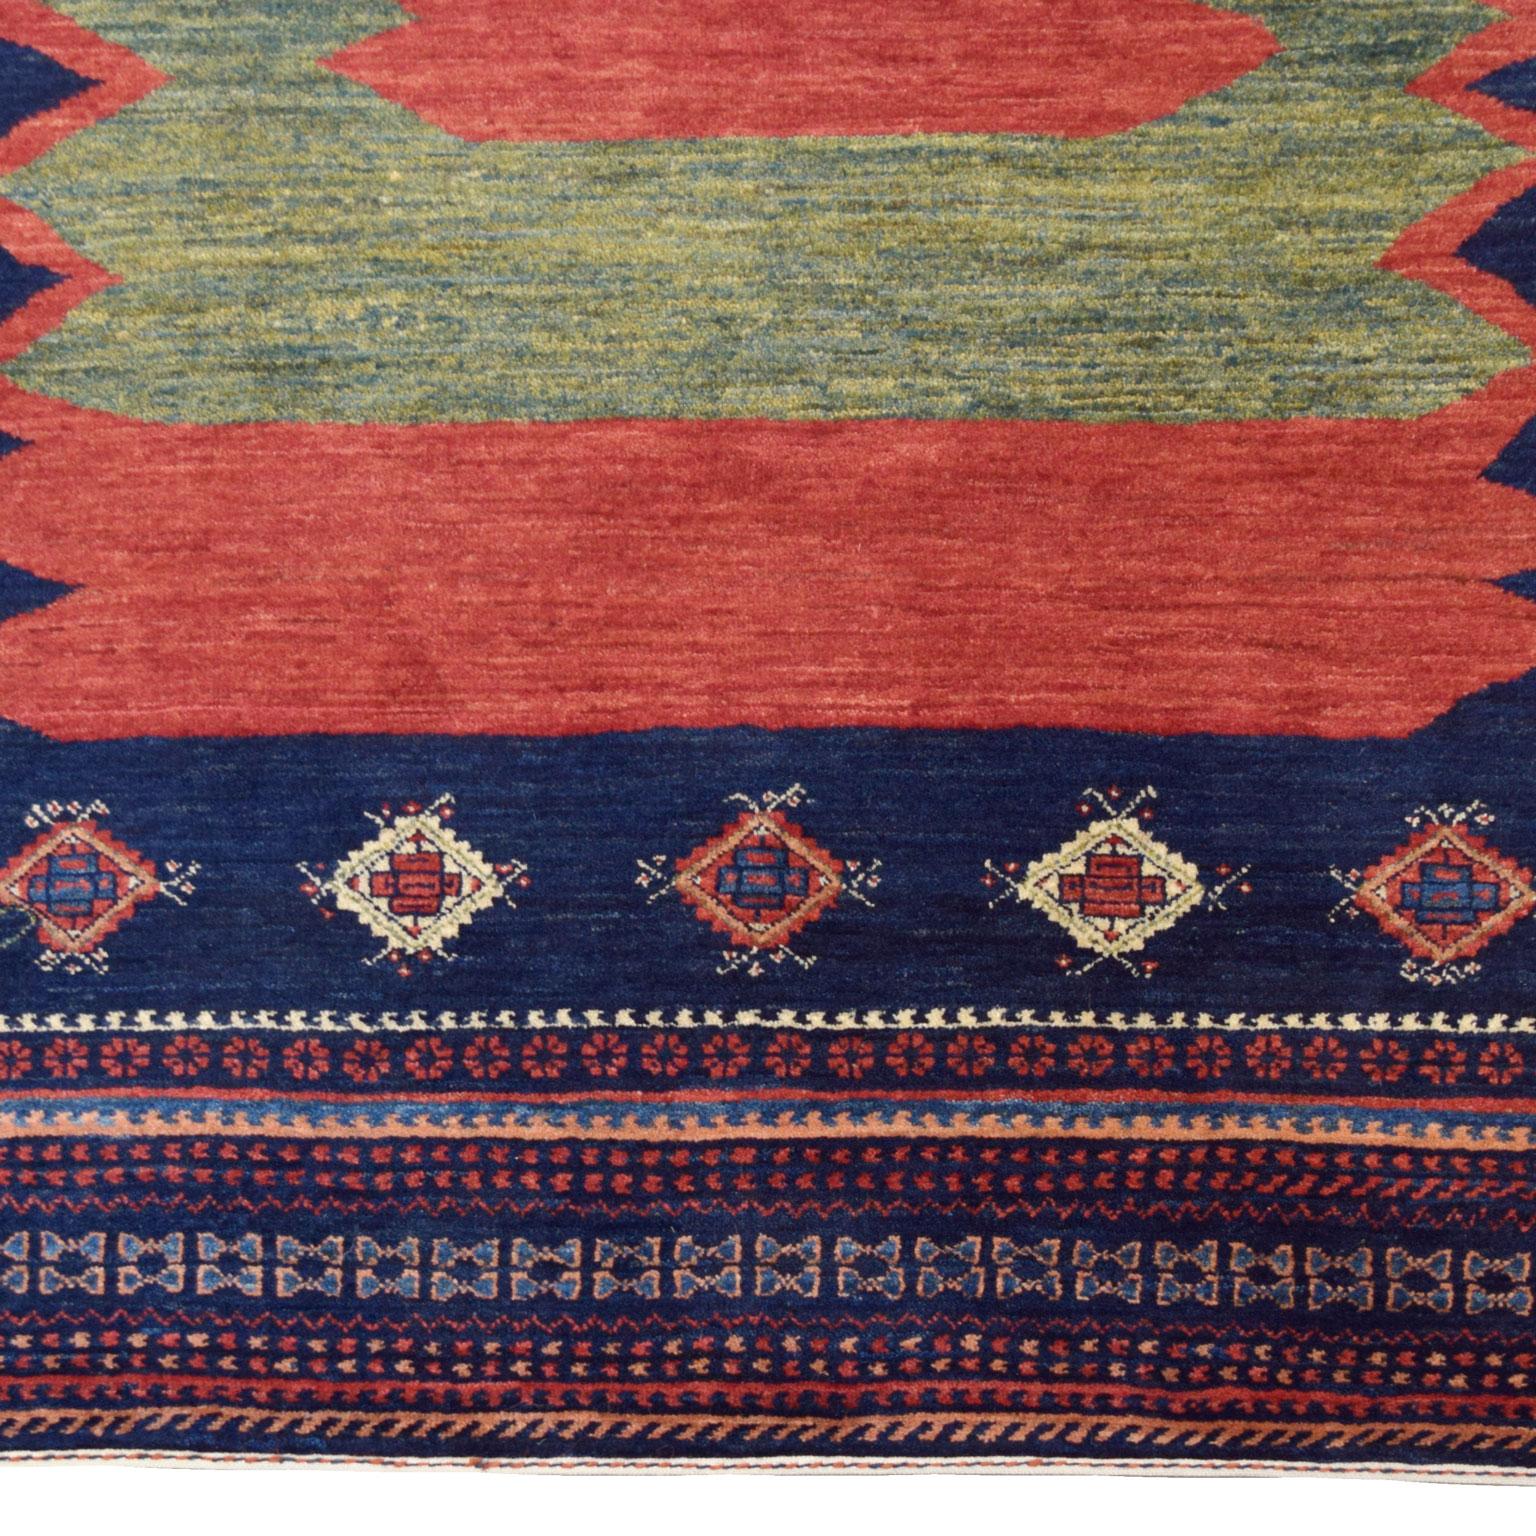 Vegetable Dyed Hand-Knotted Wool Persian Qashqai Tribal Rug, Red, Green, Indigo, Cream, 4’ x 6’ For Sale